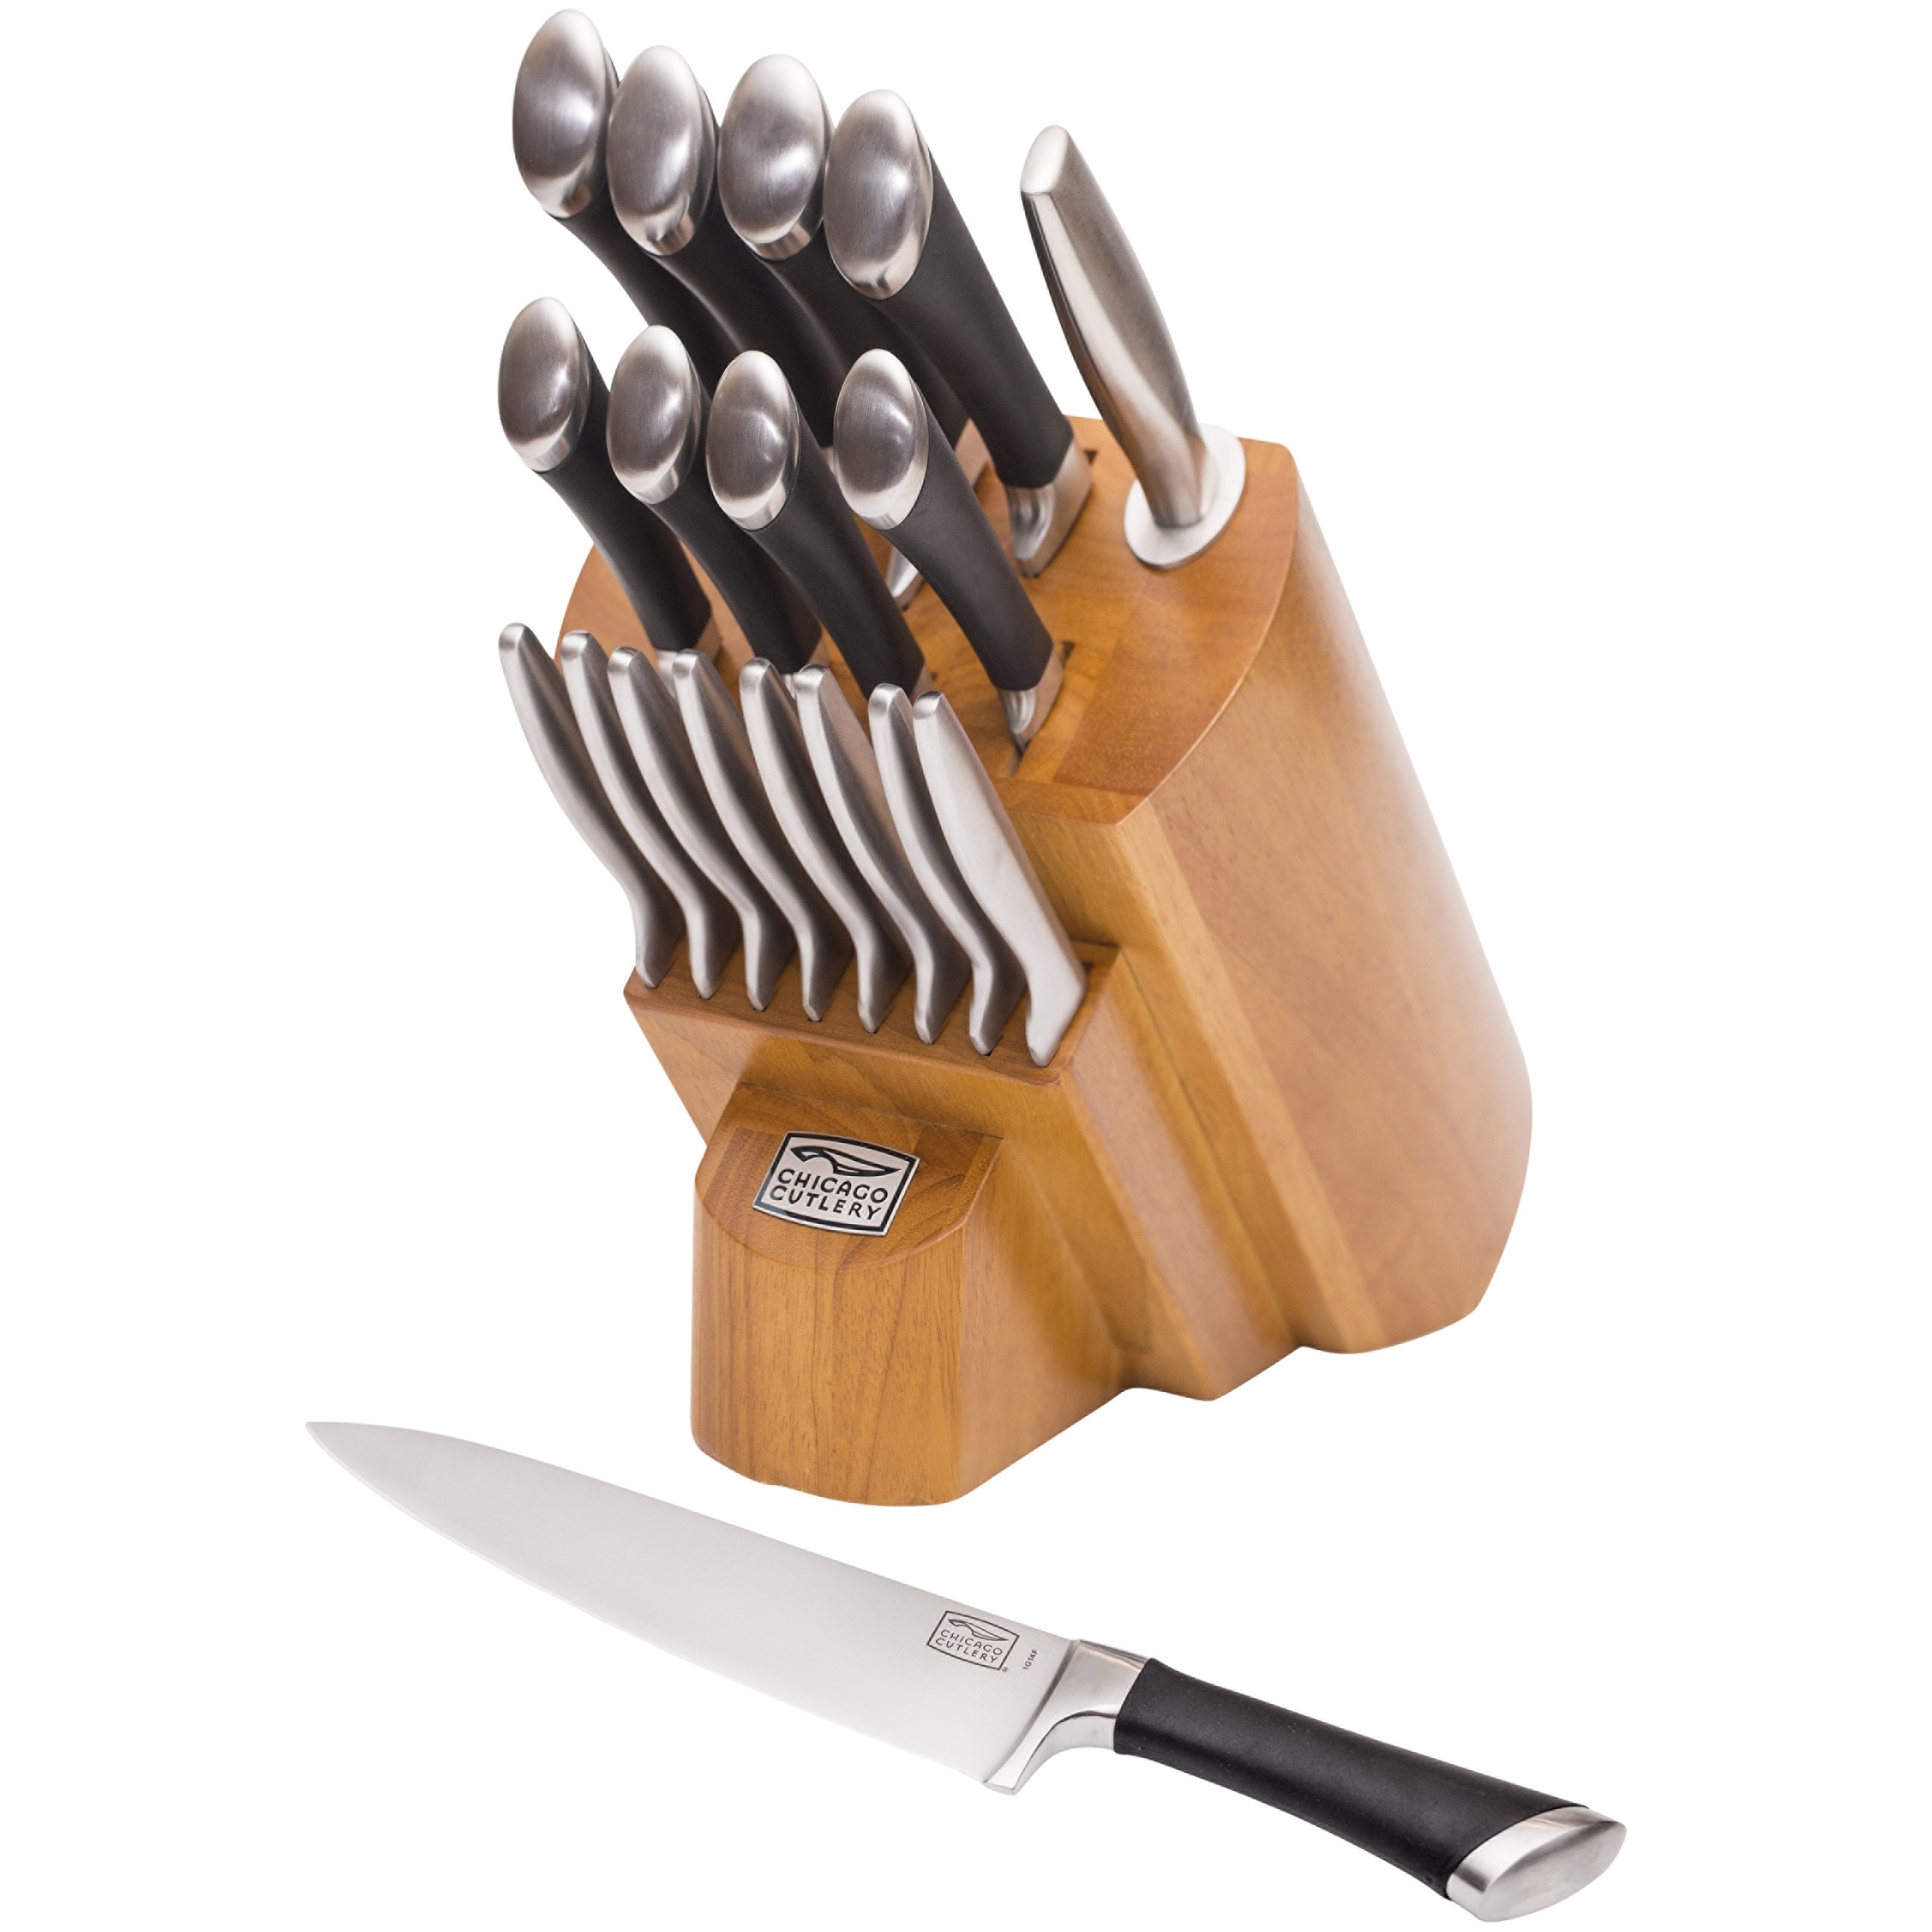 Chicago Cutlery Fusion 18-Piece Block Set - image 1 of 4